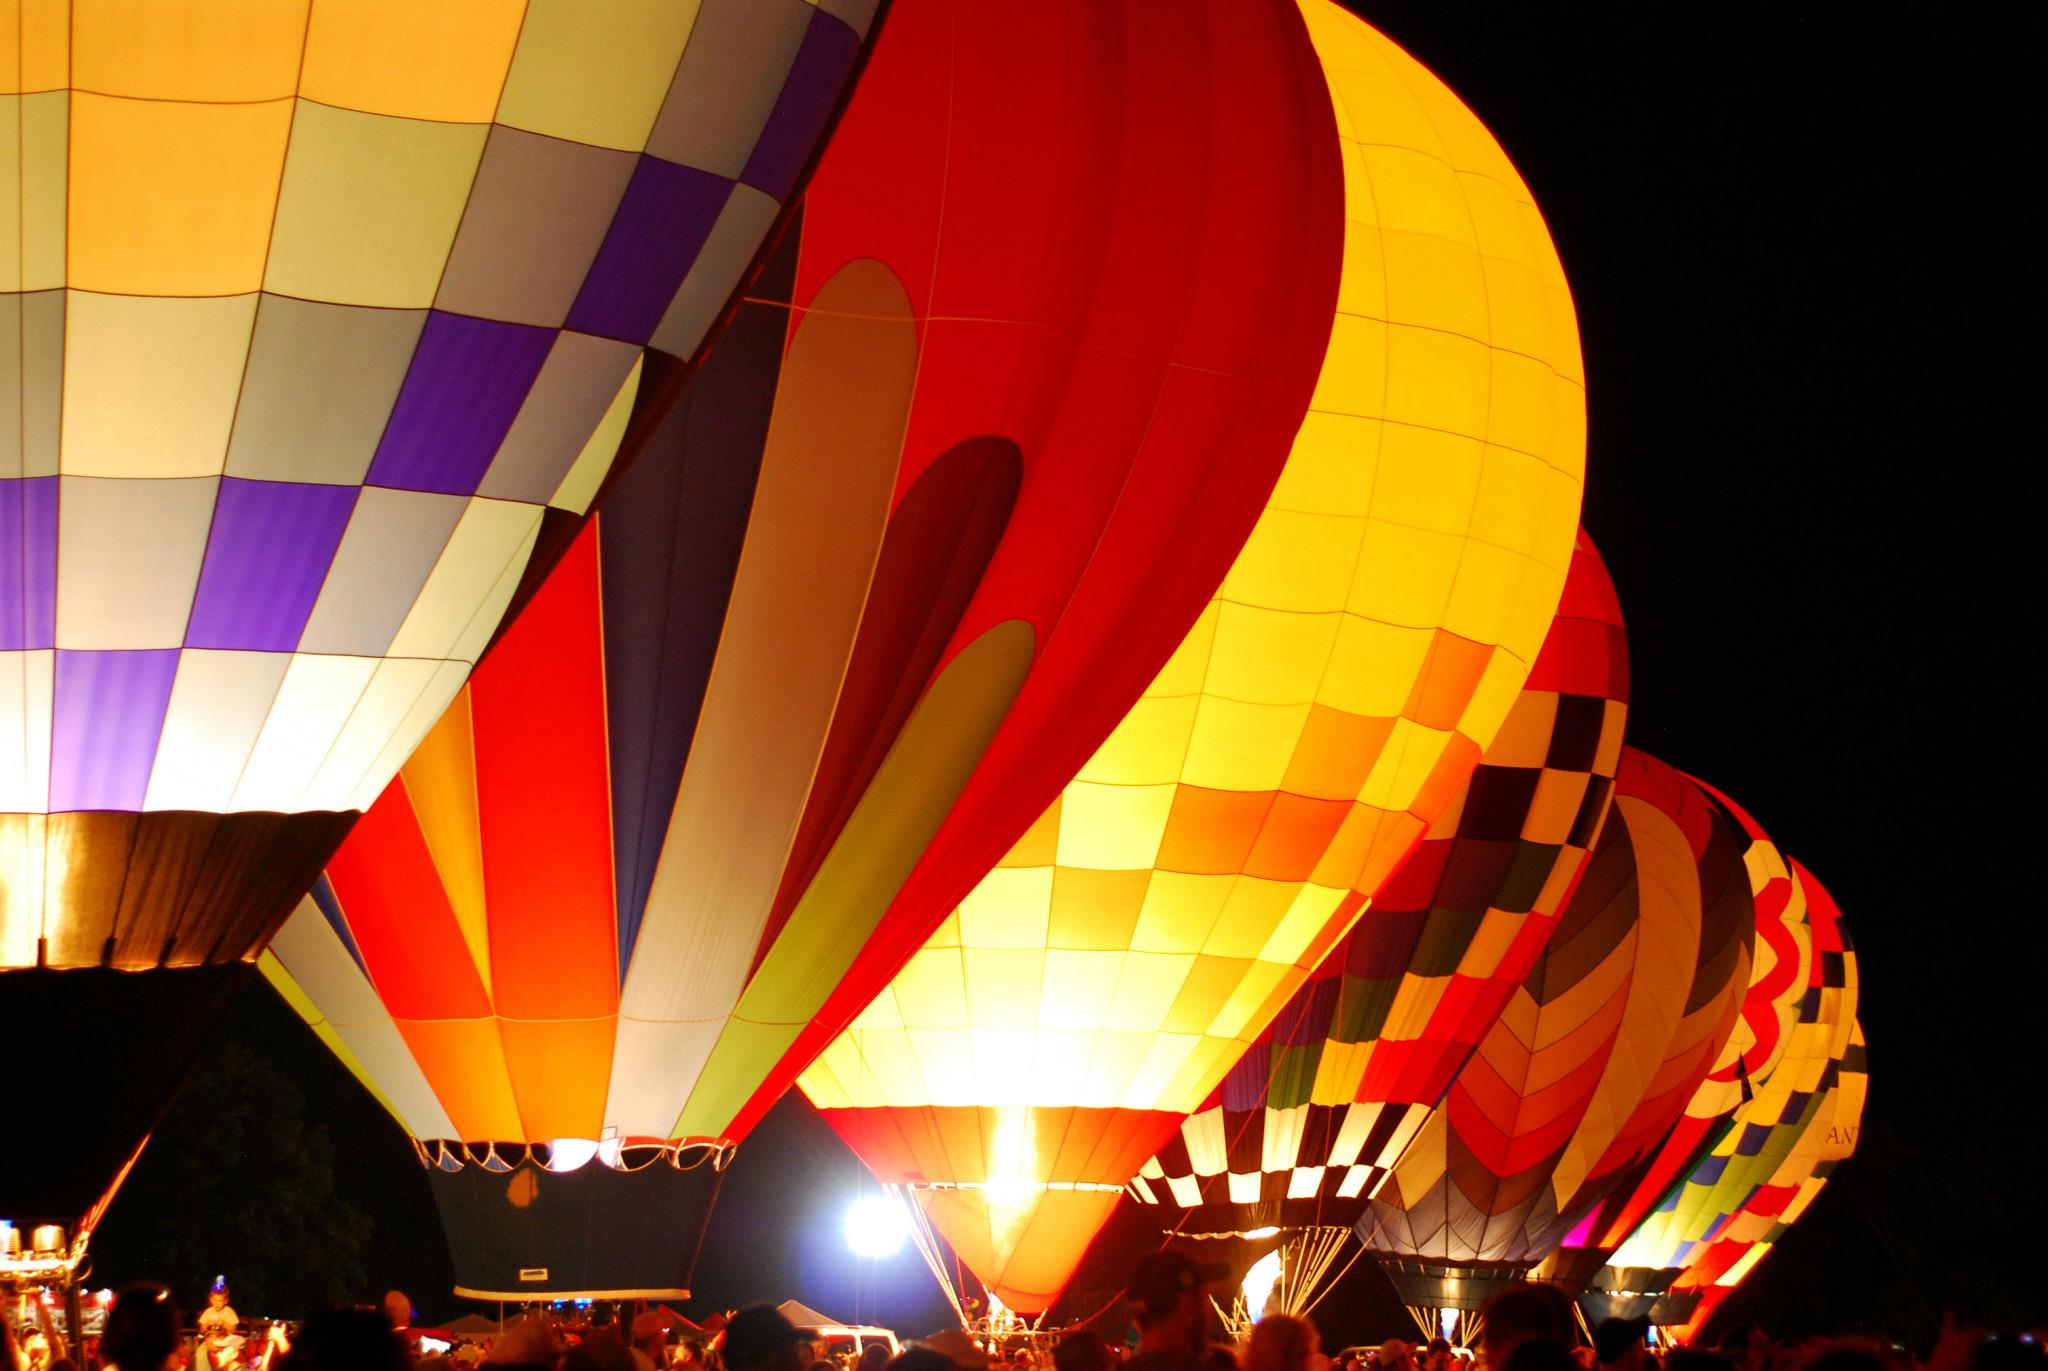 A hot air balloon at night in Forest Park